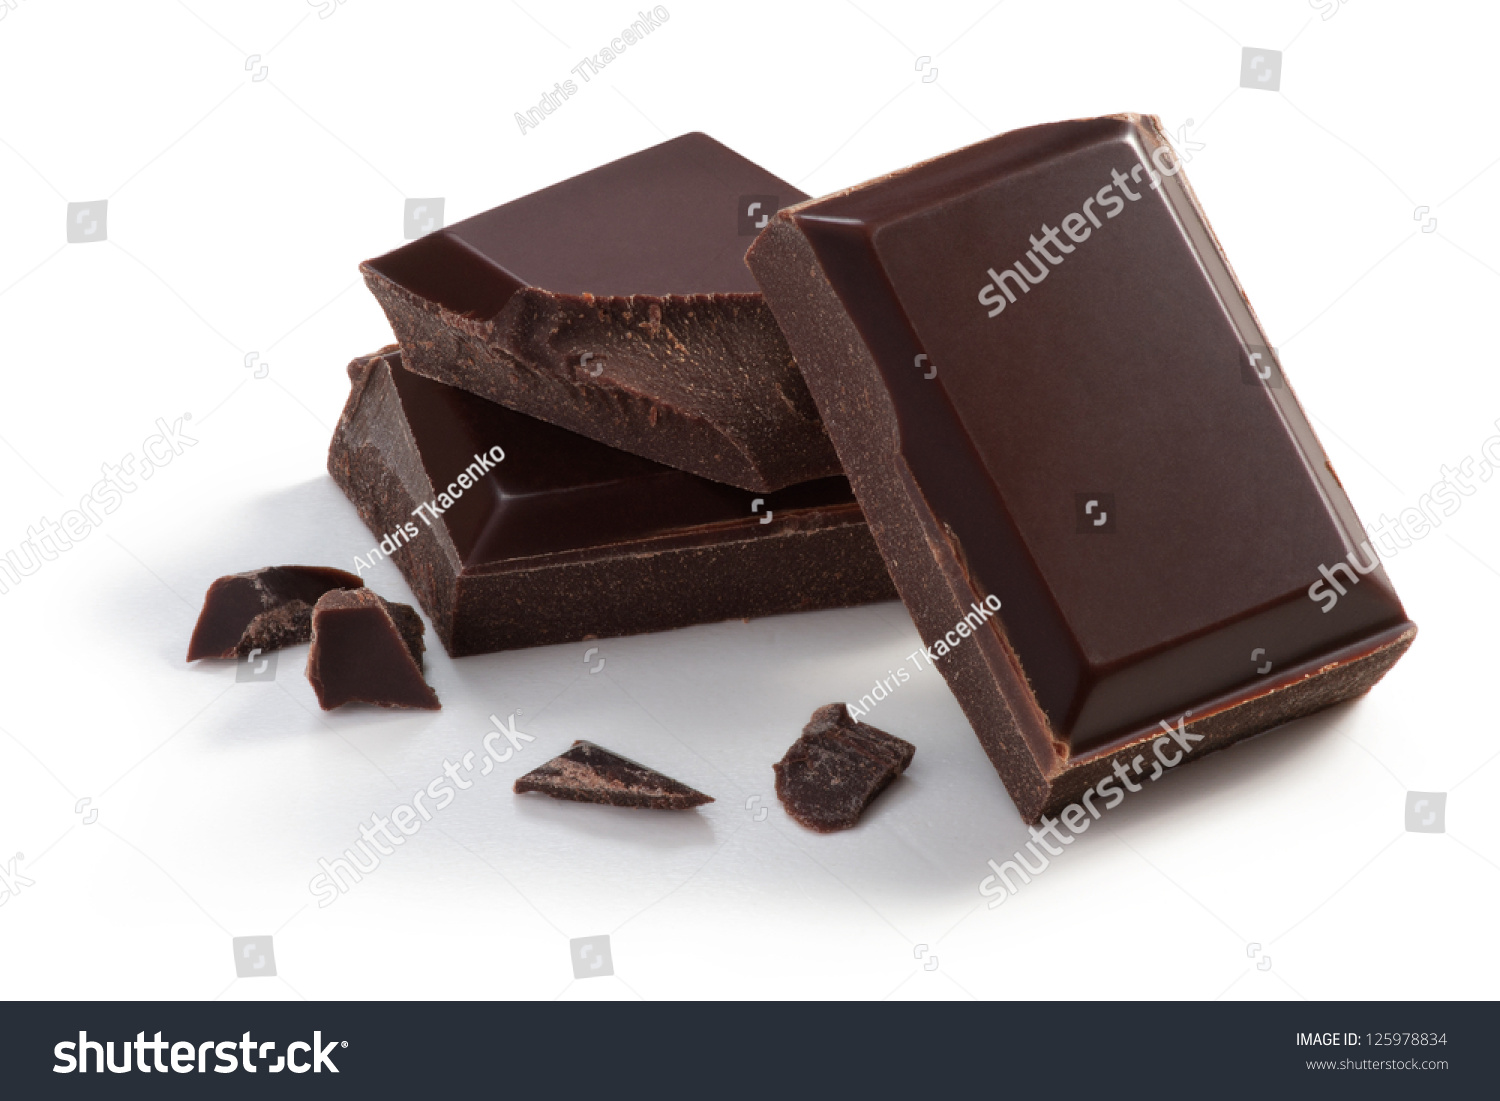 Three  pieces of Chocolate isolated on white, cleaned and retouched photo. #125978834